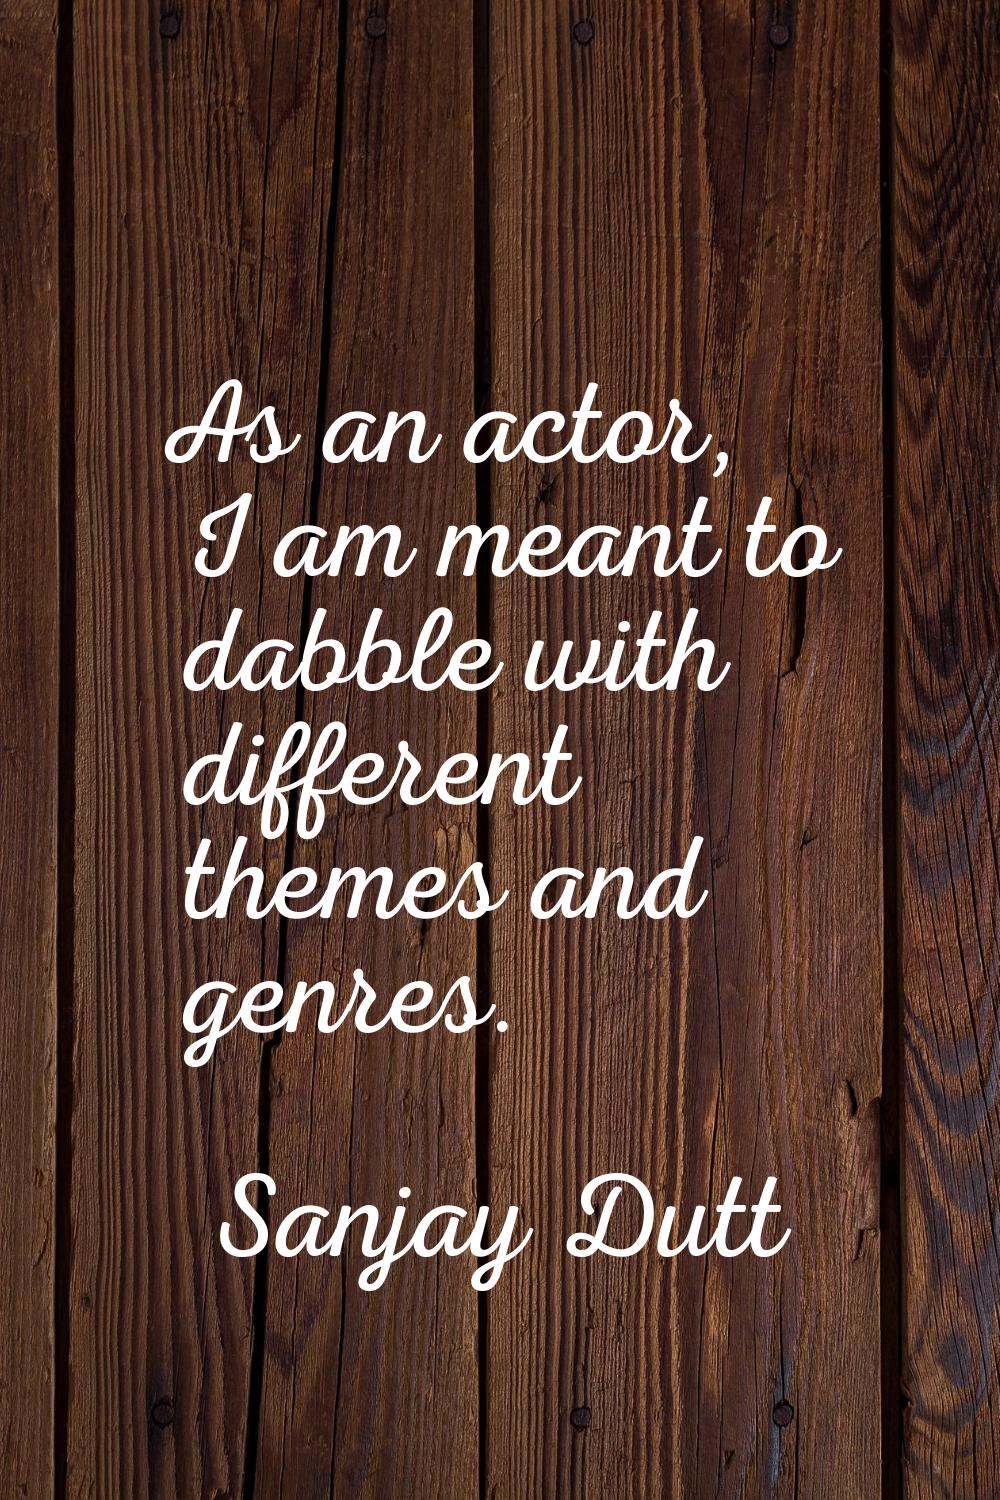 As an actor, I am meant to dabble with different themes and genres.